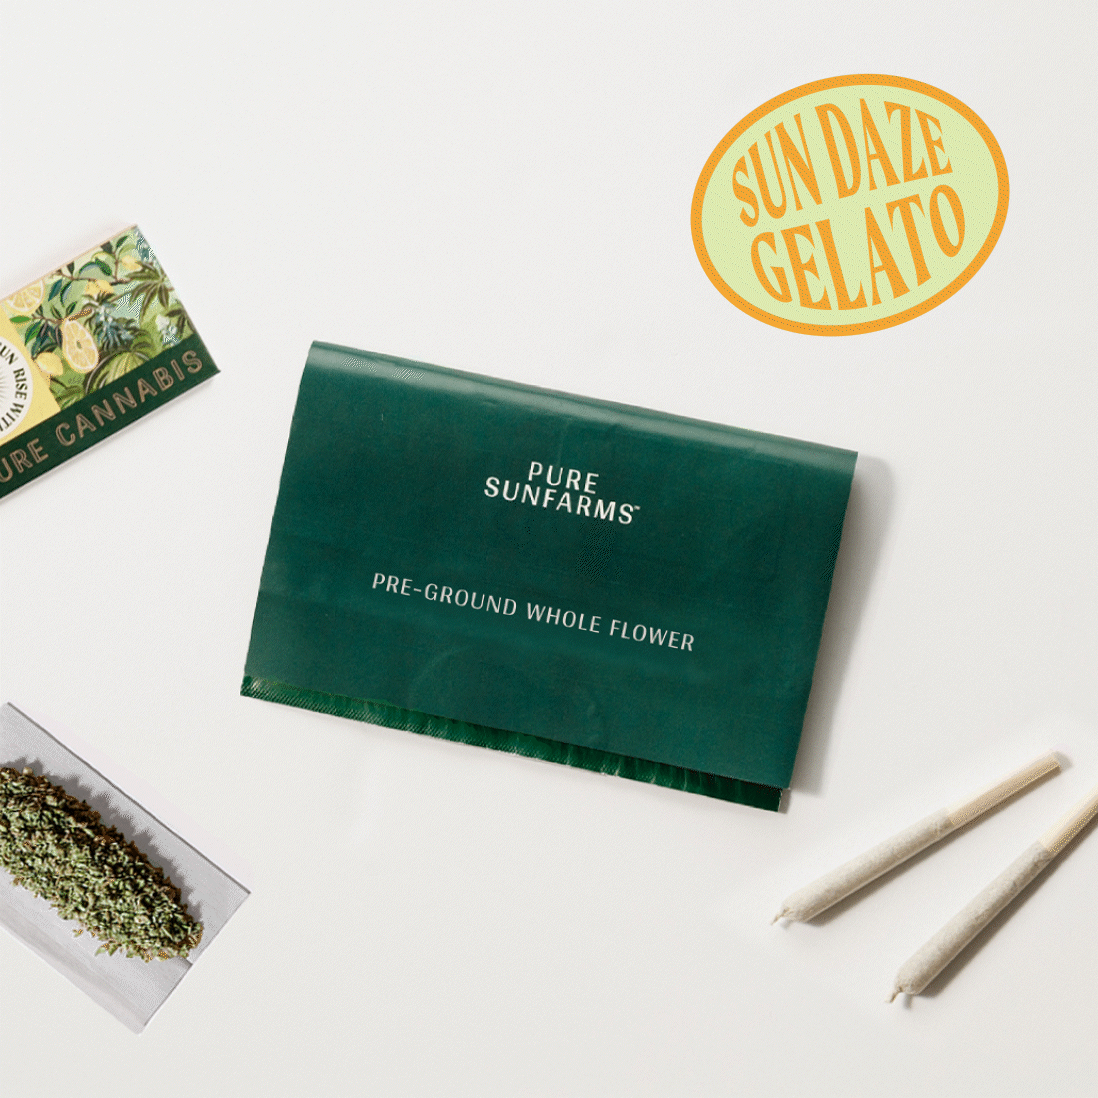 sun daze gelato concept pack with pre-rolls and rolling paper